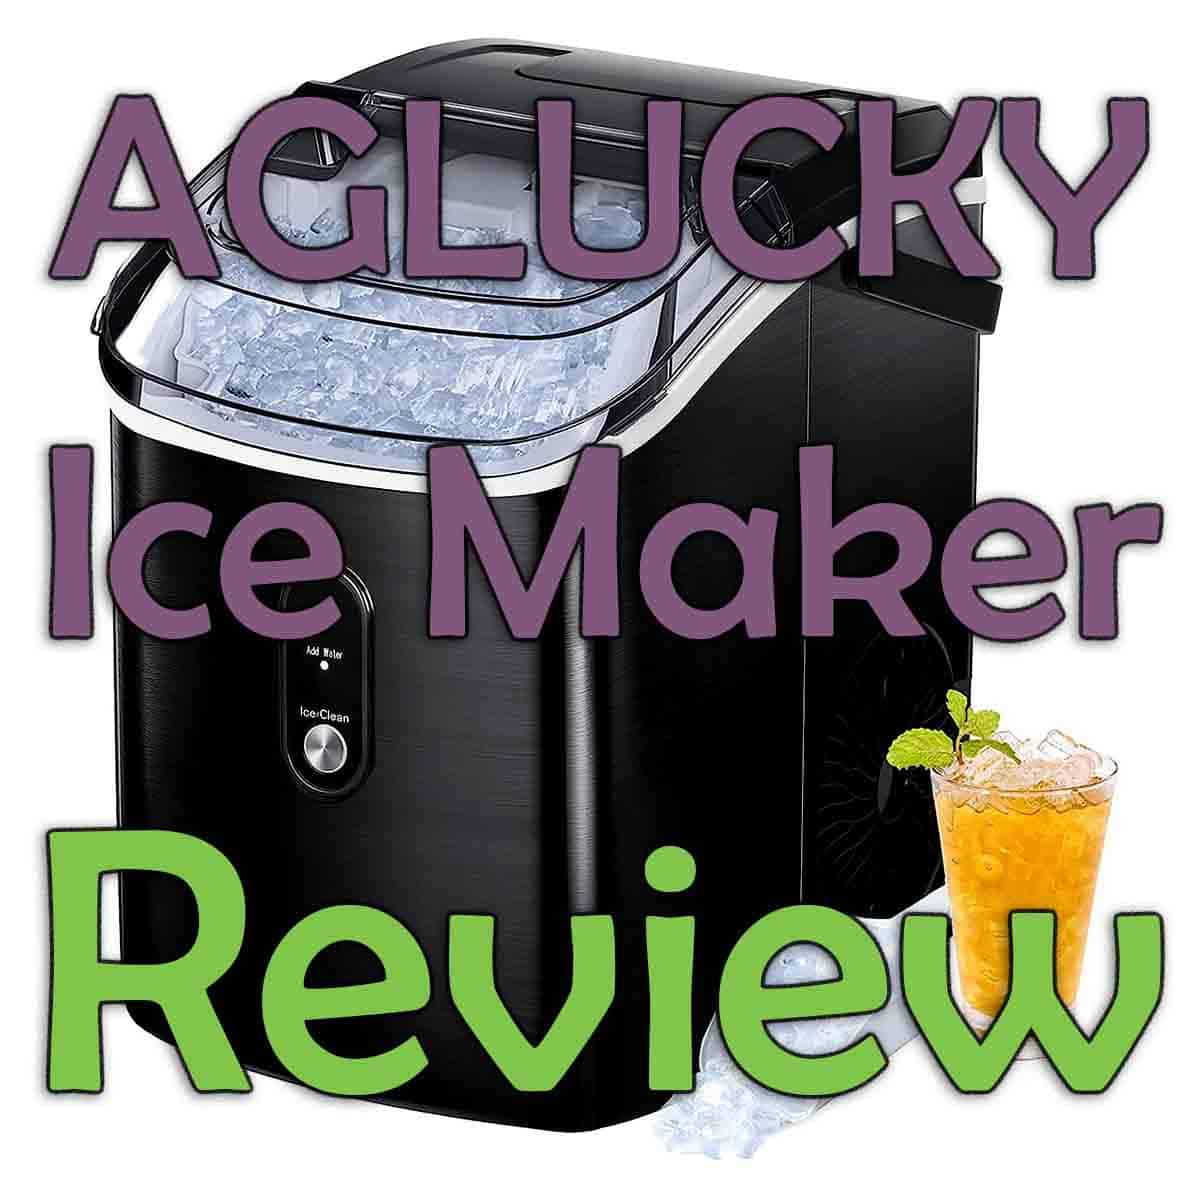 AGLUCKY Nugget Ice Maker Countertop, Portable Pebble Ice Maker Machine,  35lbs/Day Chewable Ice, Self-Cleaning, Stainless Steel, Pellet Ice Maker  for Home/Kitchen/Office (Silver) - Yahoo Shopping